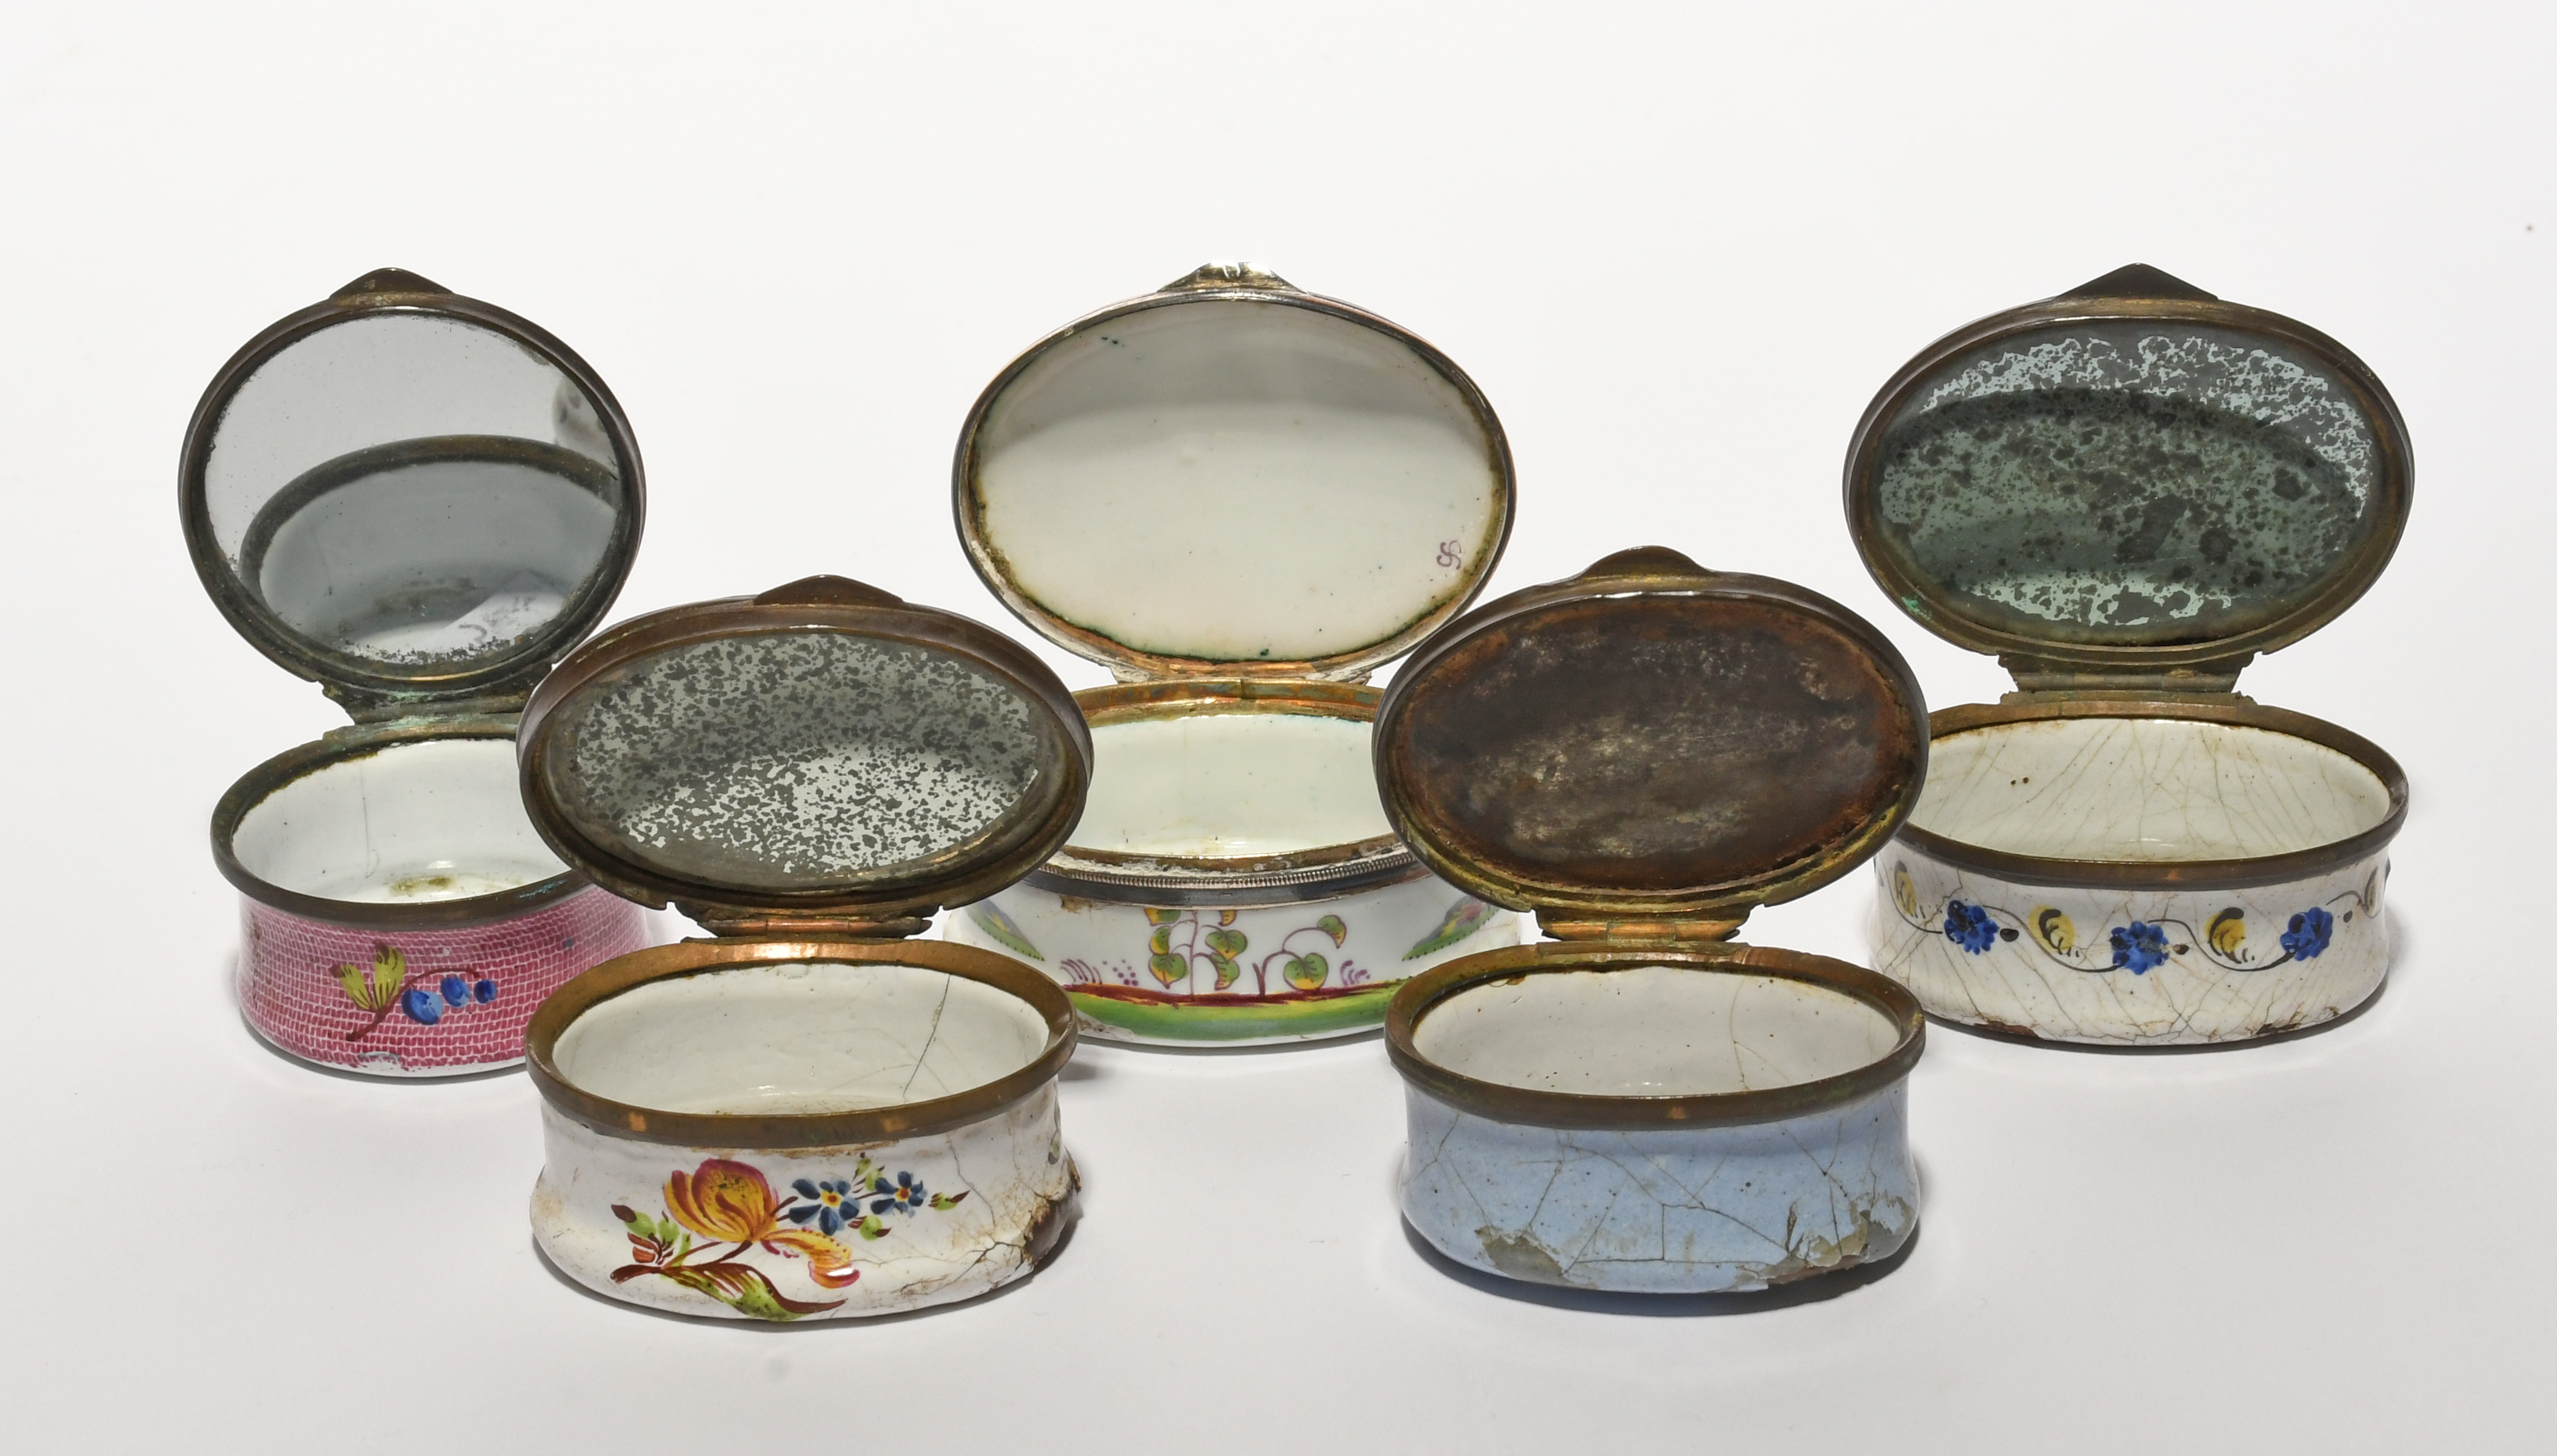 Five enamel patch boxes, 2nd half 18th century, one circular and painted with a rose spray on a dark - Image 3 of 3